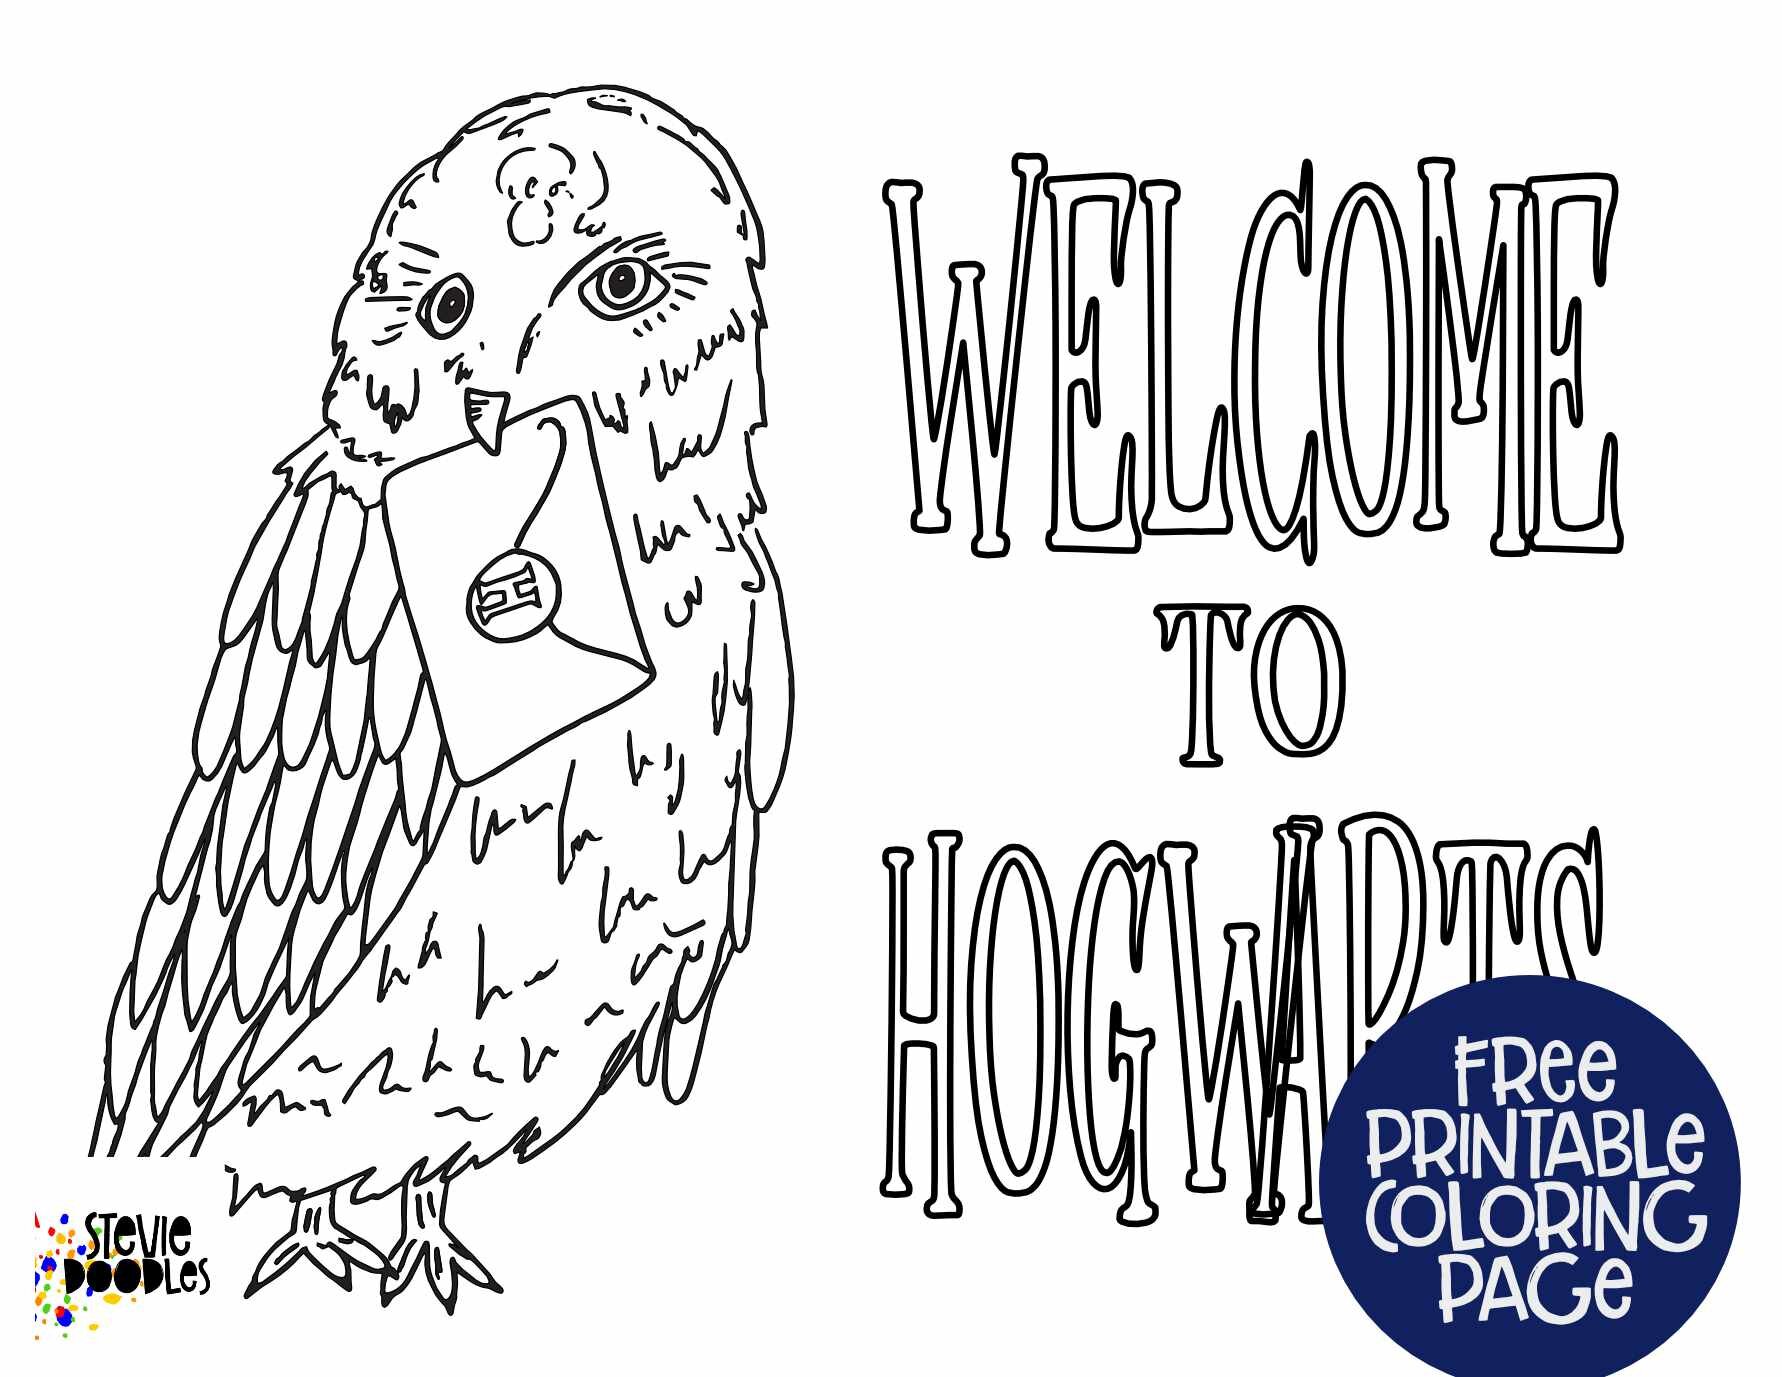 hedwig — 20+ Free Printable Coloring Pages — Stevie Doodles Free ...